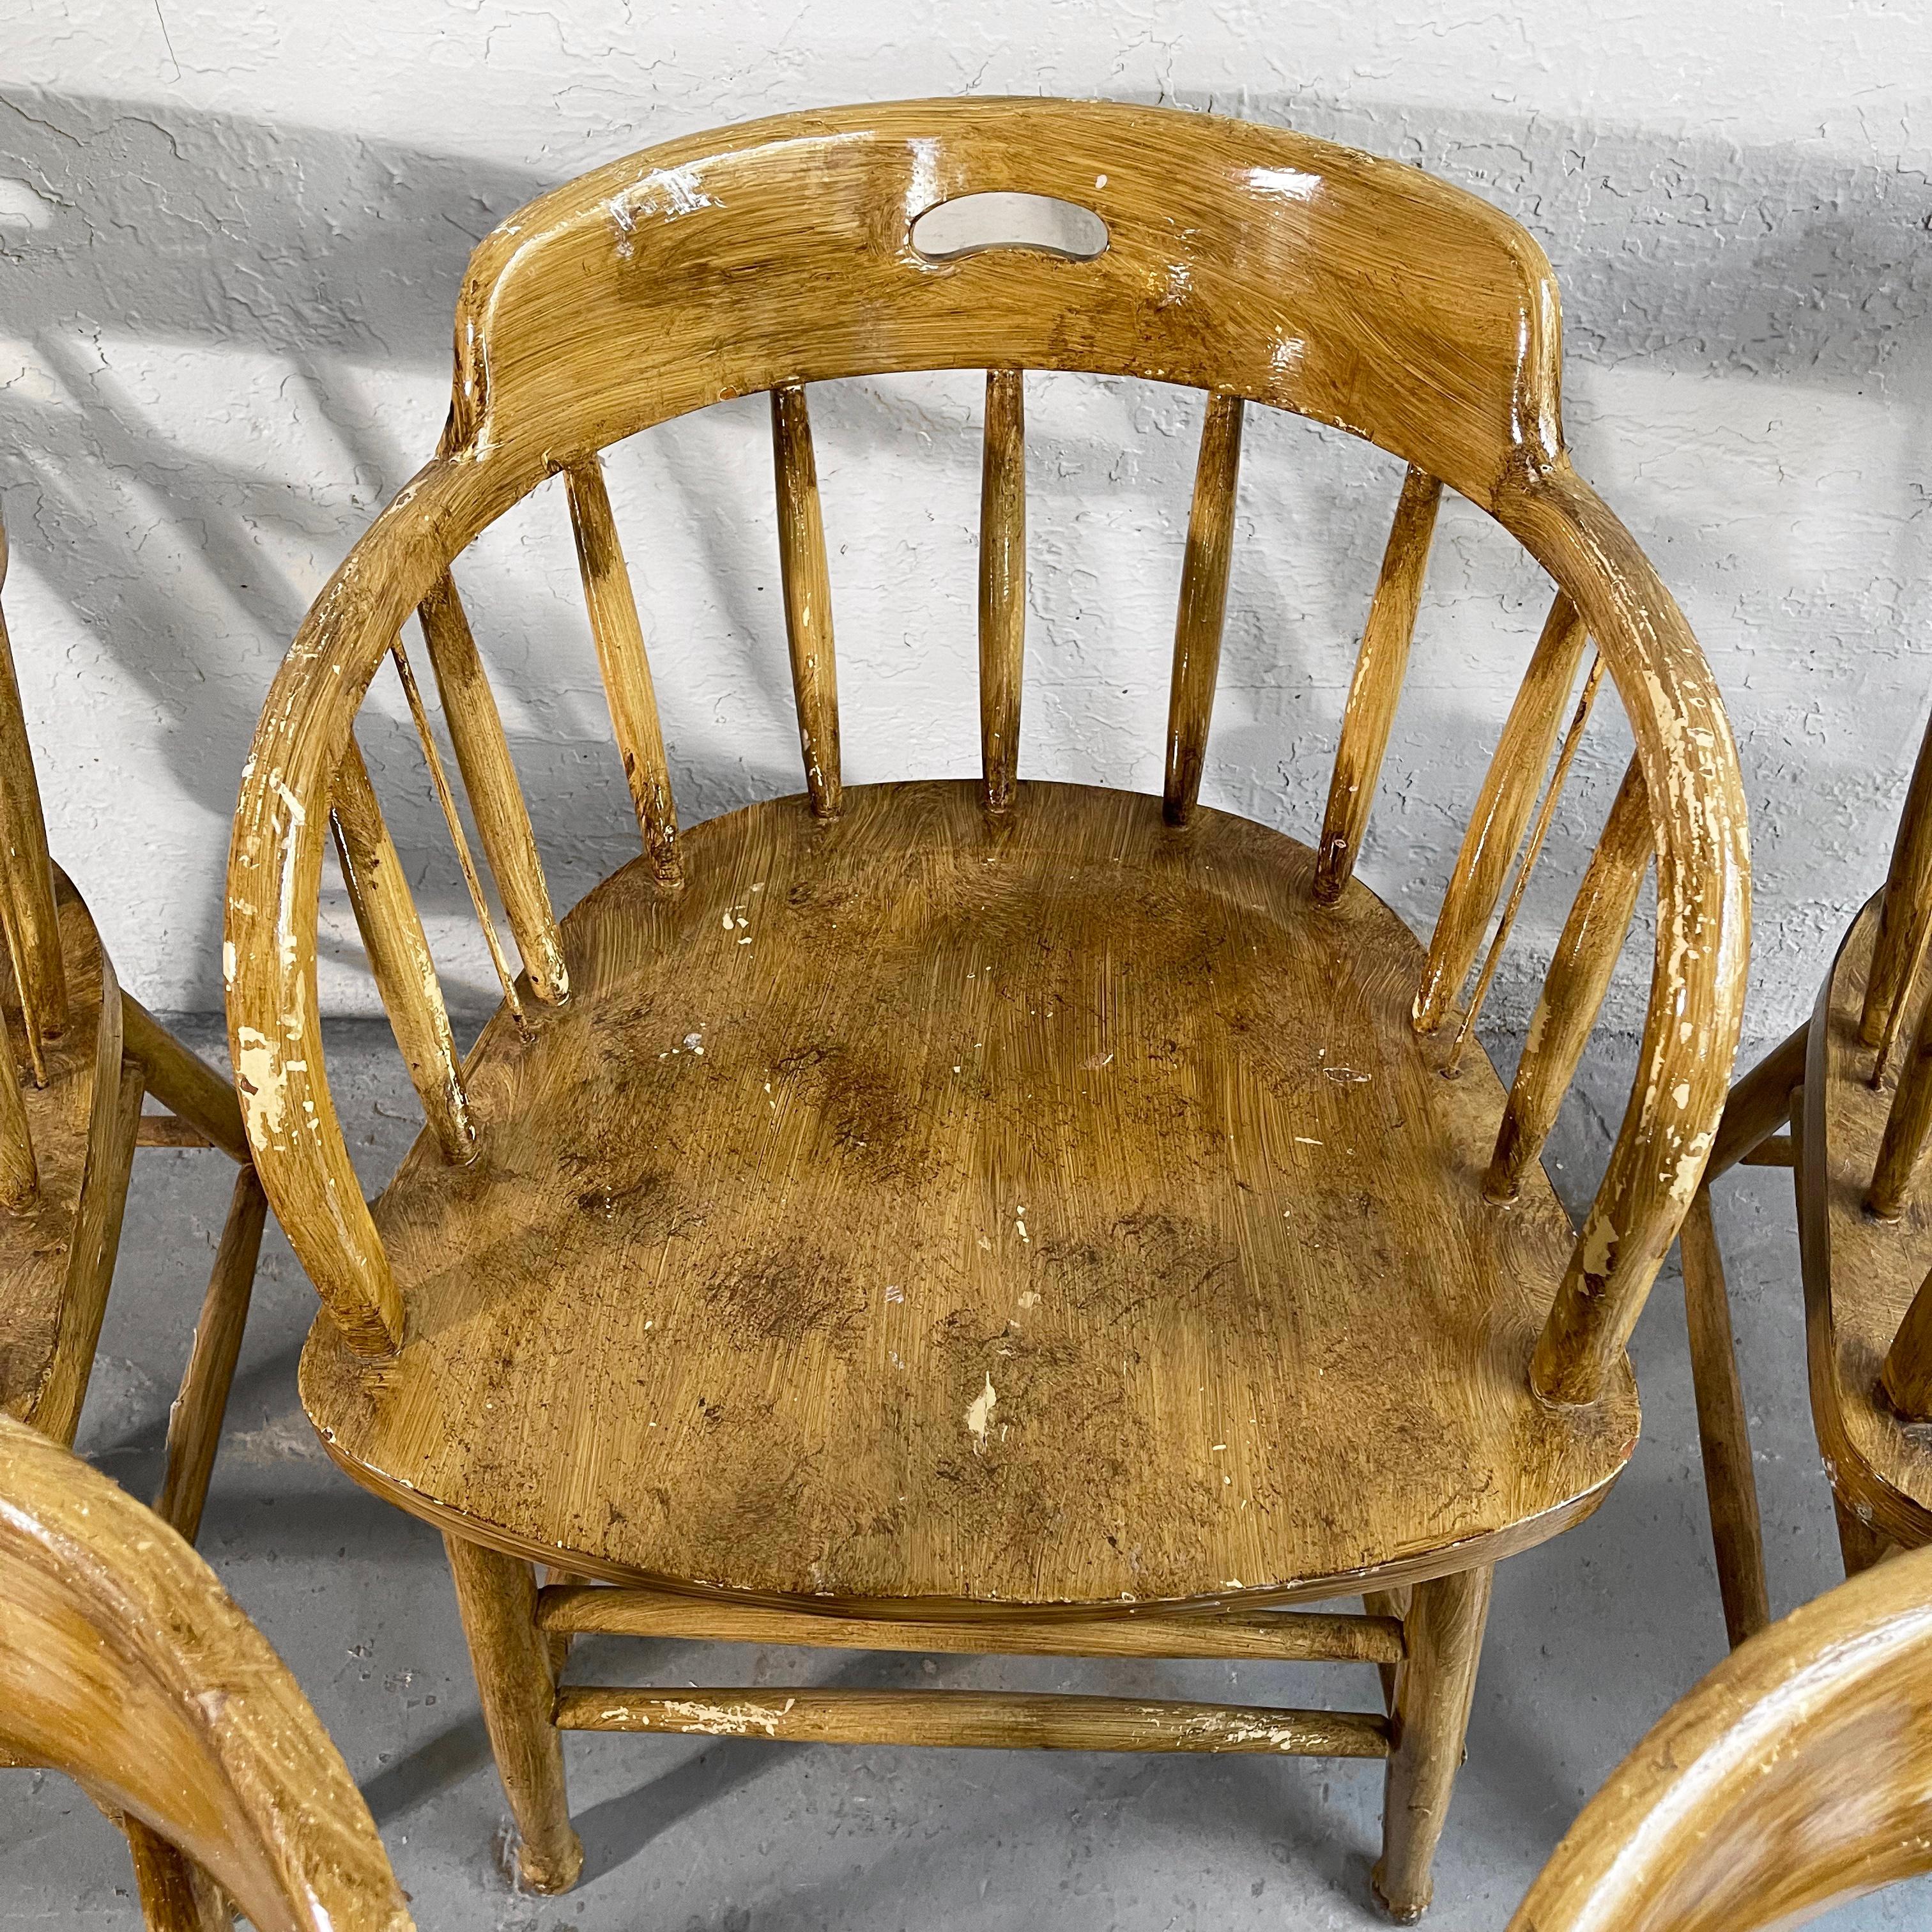 Early 20th Century, Rustic Oak Firehouse Dining Chairs 3